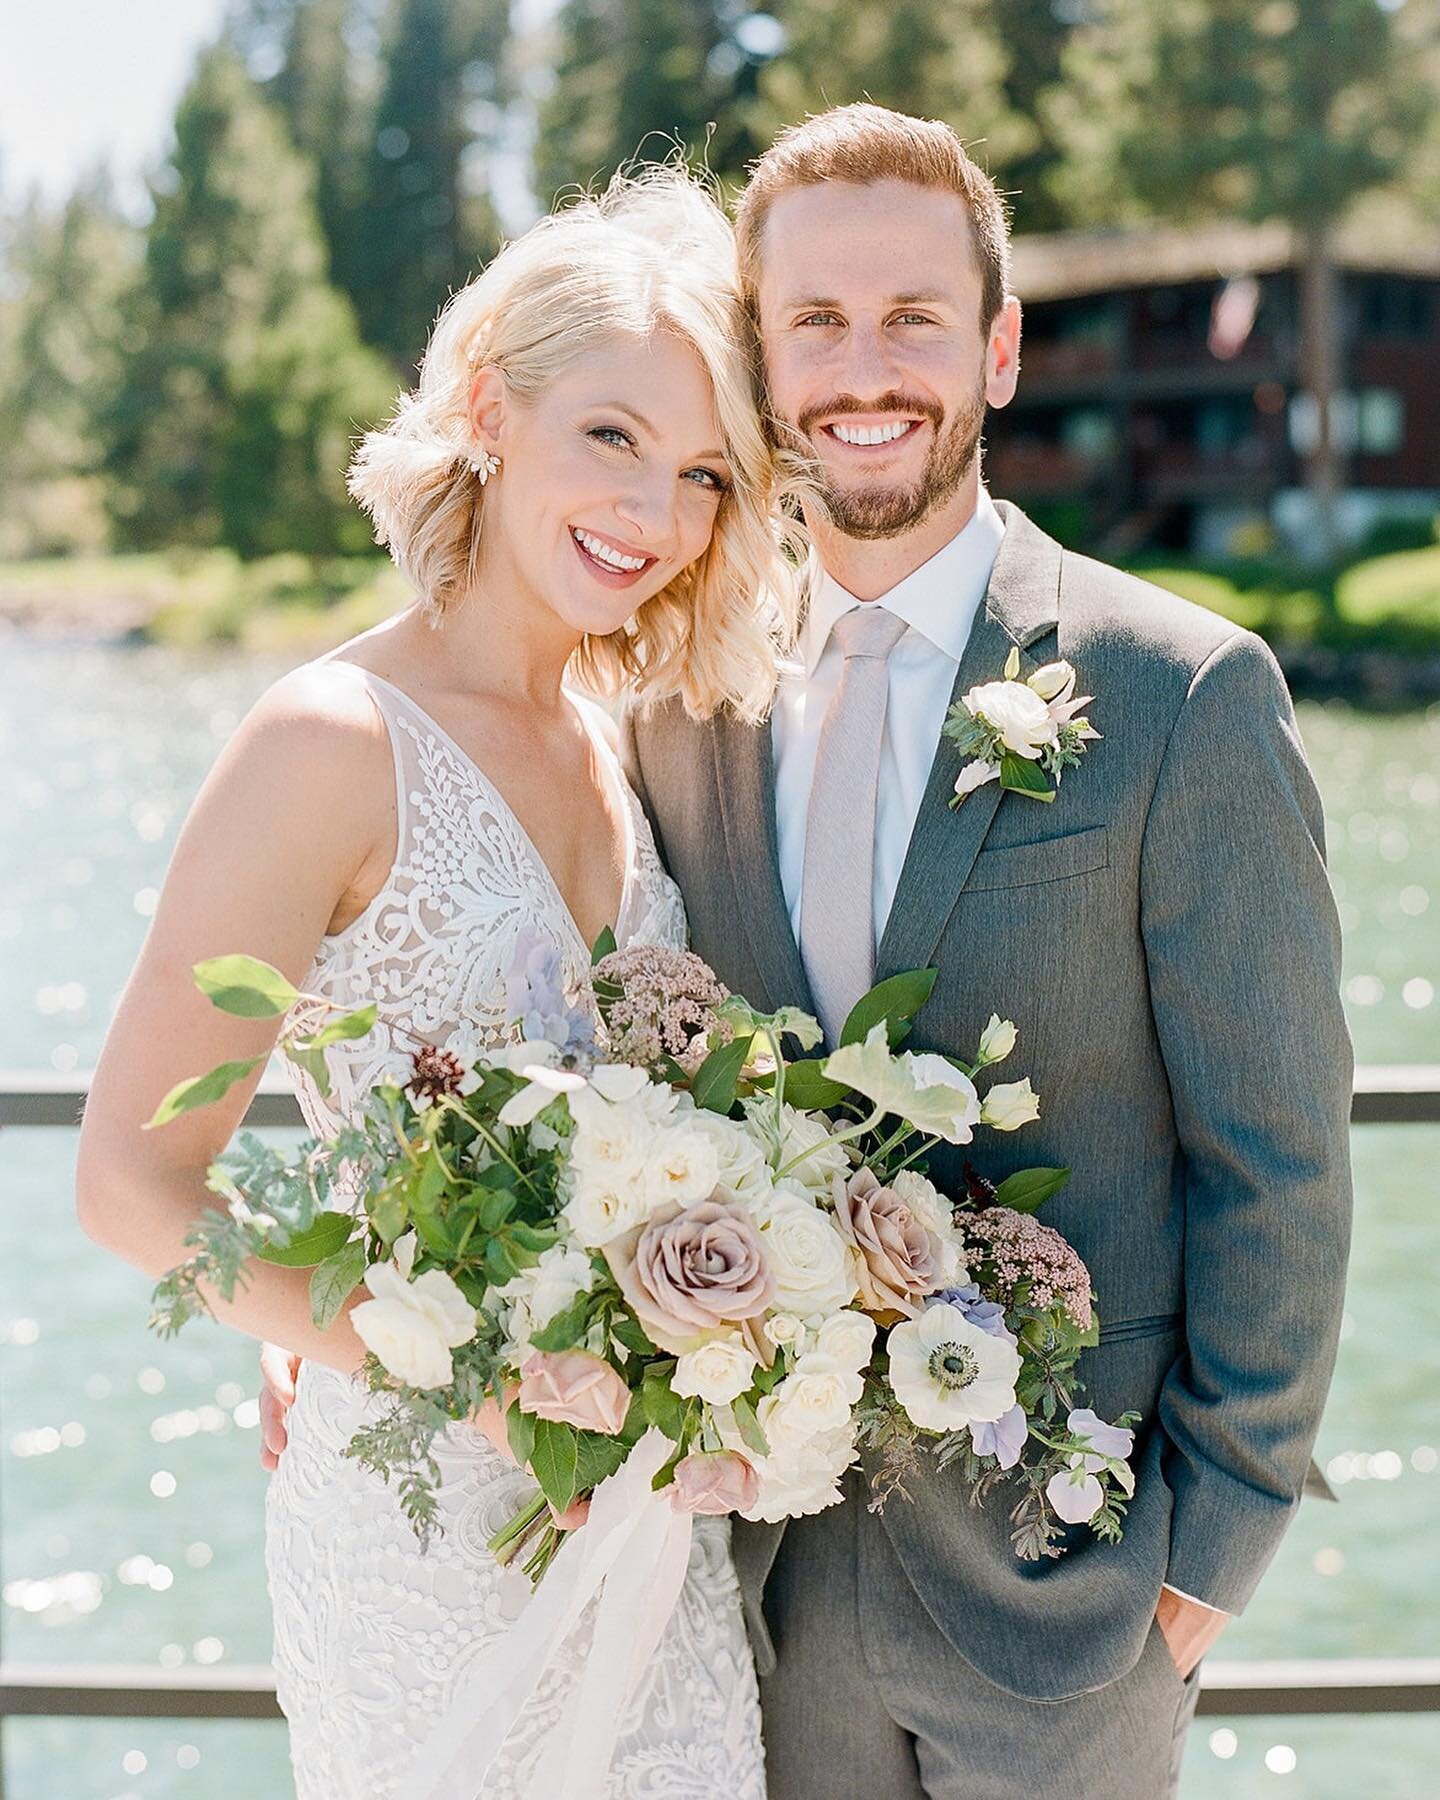 Can&rsquo;t wait to see these happy faces on the front page of Style Me Pretty next month! 
//
Planning: @audereevents
Photography: @janinelicarephotography 
Florals: @stemsbydiana 
Hair and Makeup: @statussalonagency 
Dress: @madewithlovebridal @lov